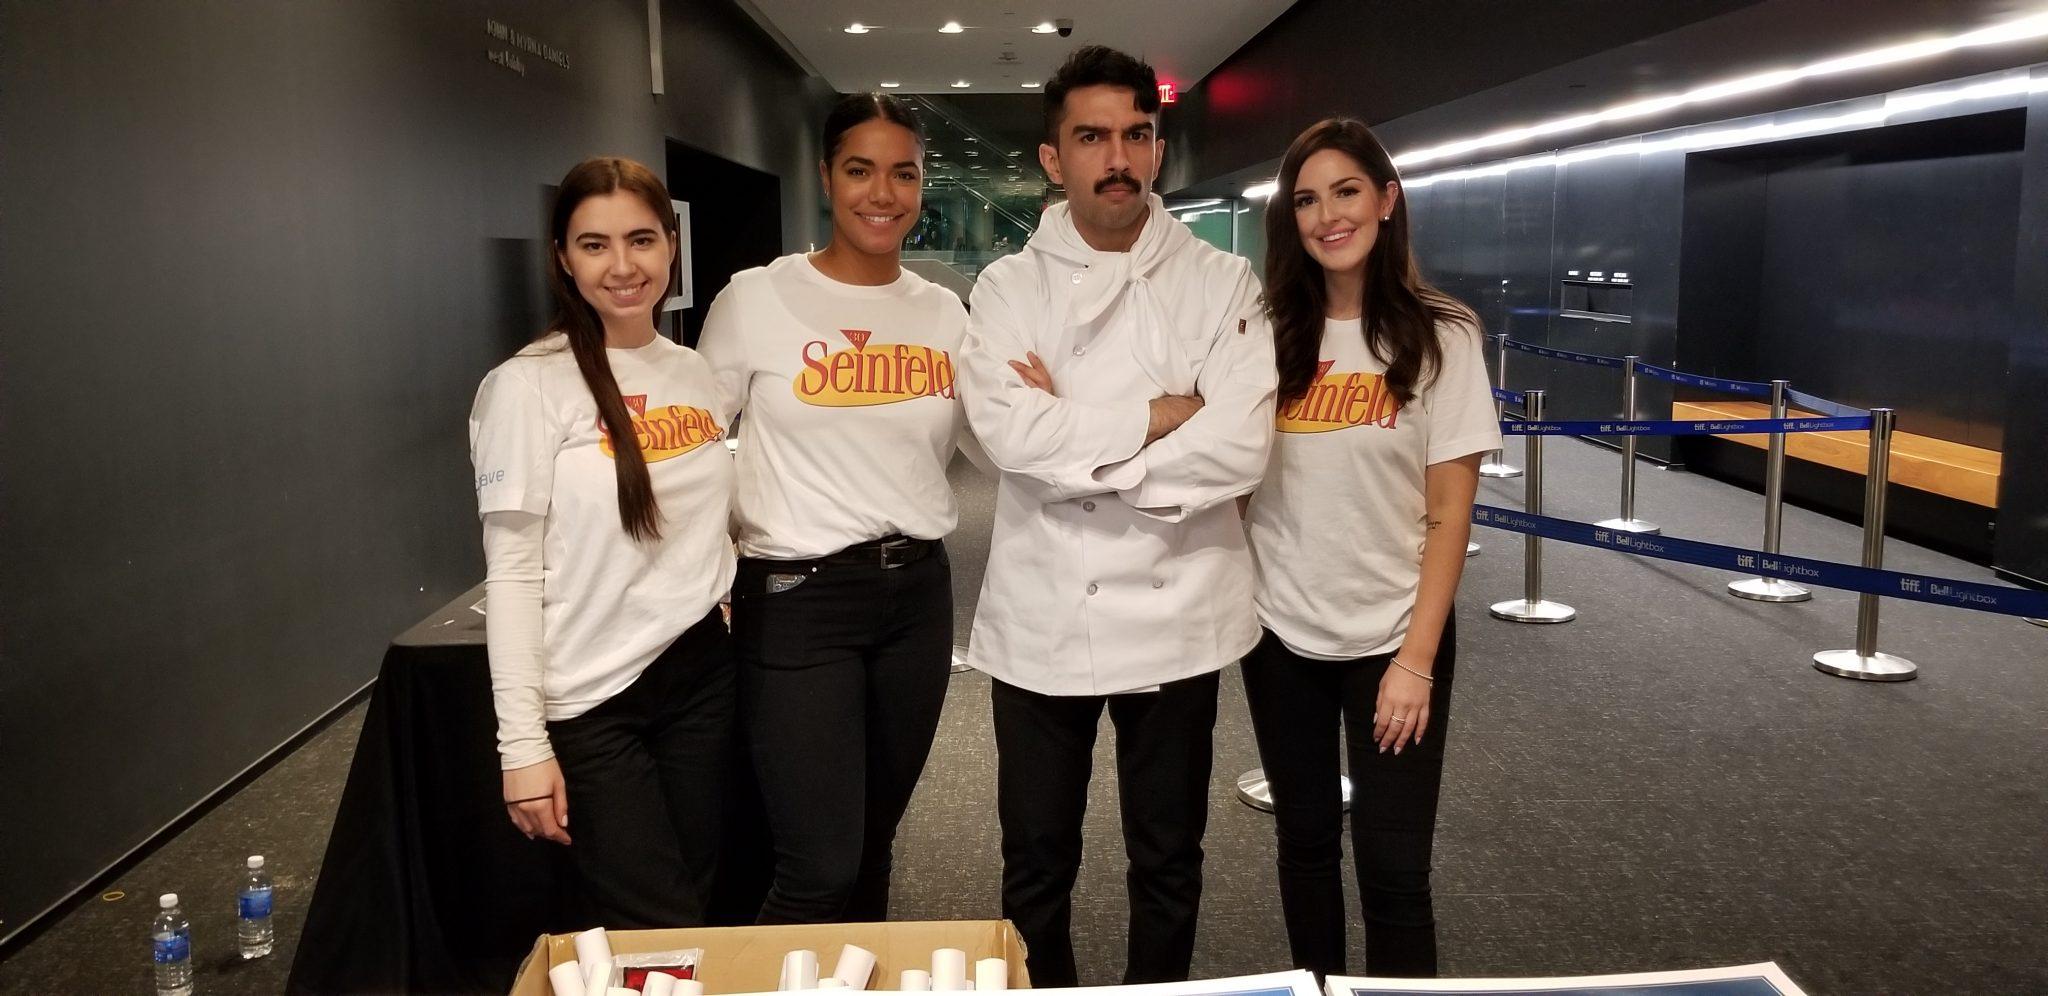 Product Seinfeld 30th Anniversary Screening - MPOSSIBLE Events | Events, parties, experiential & sampling image